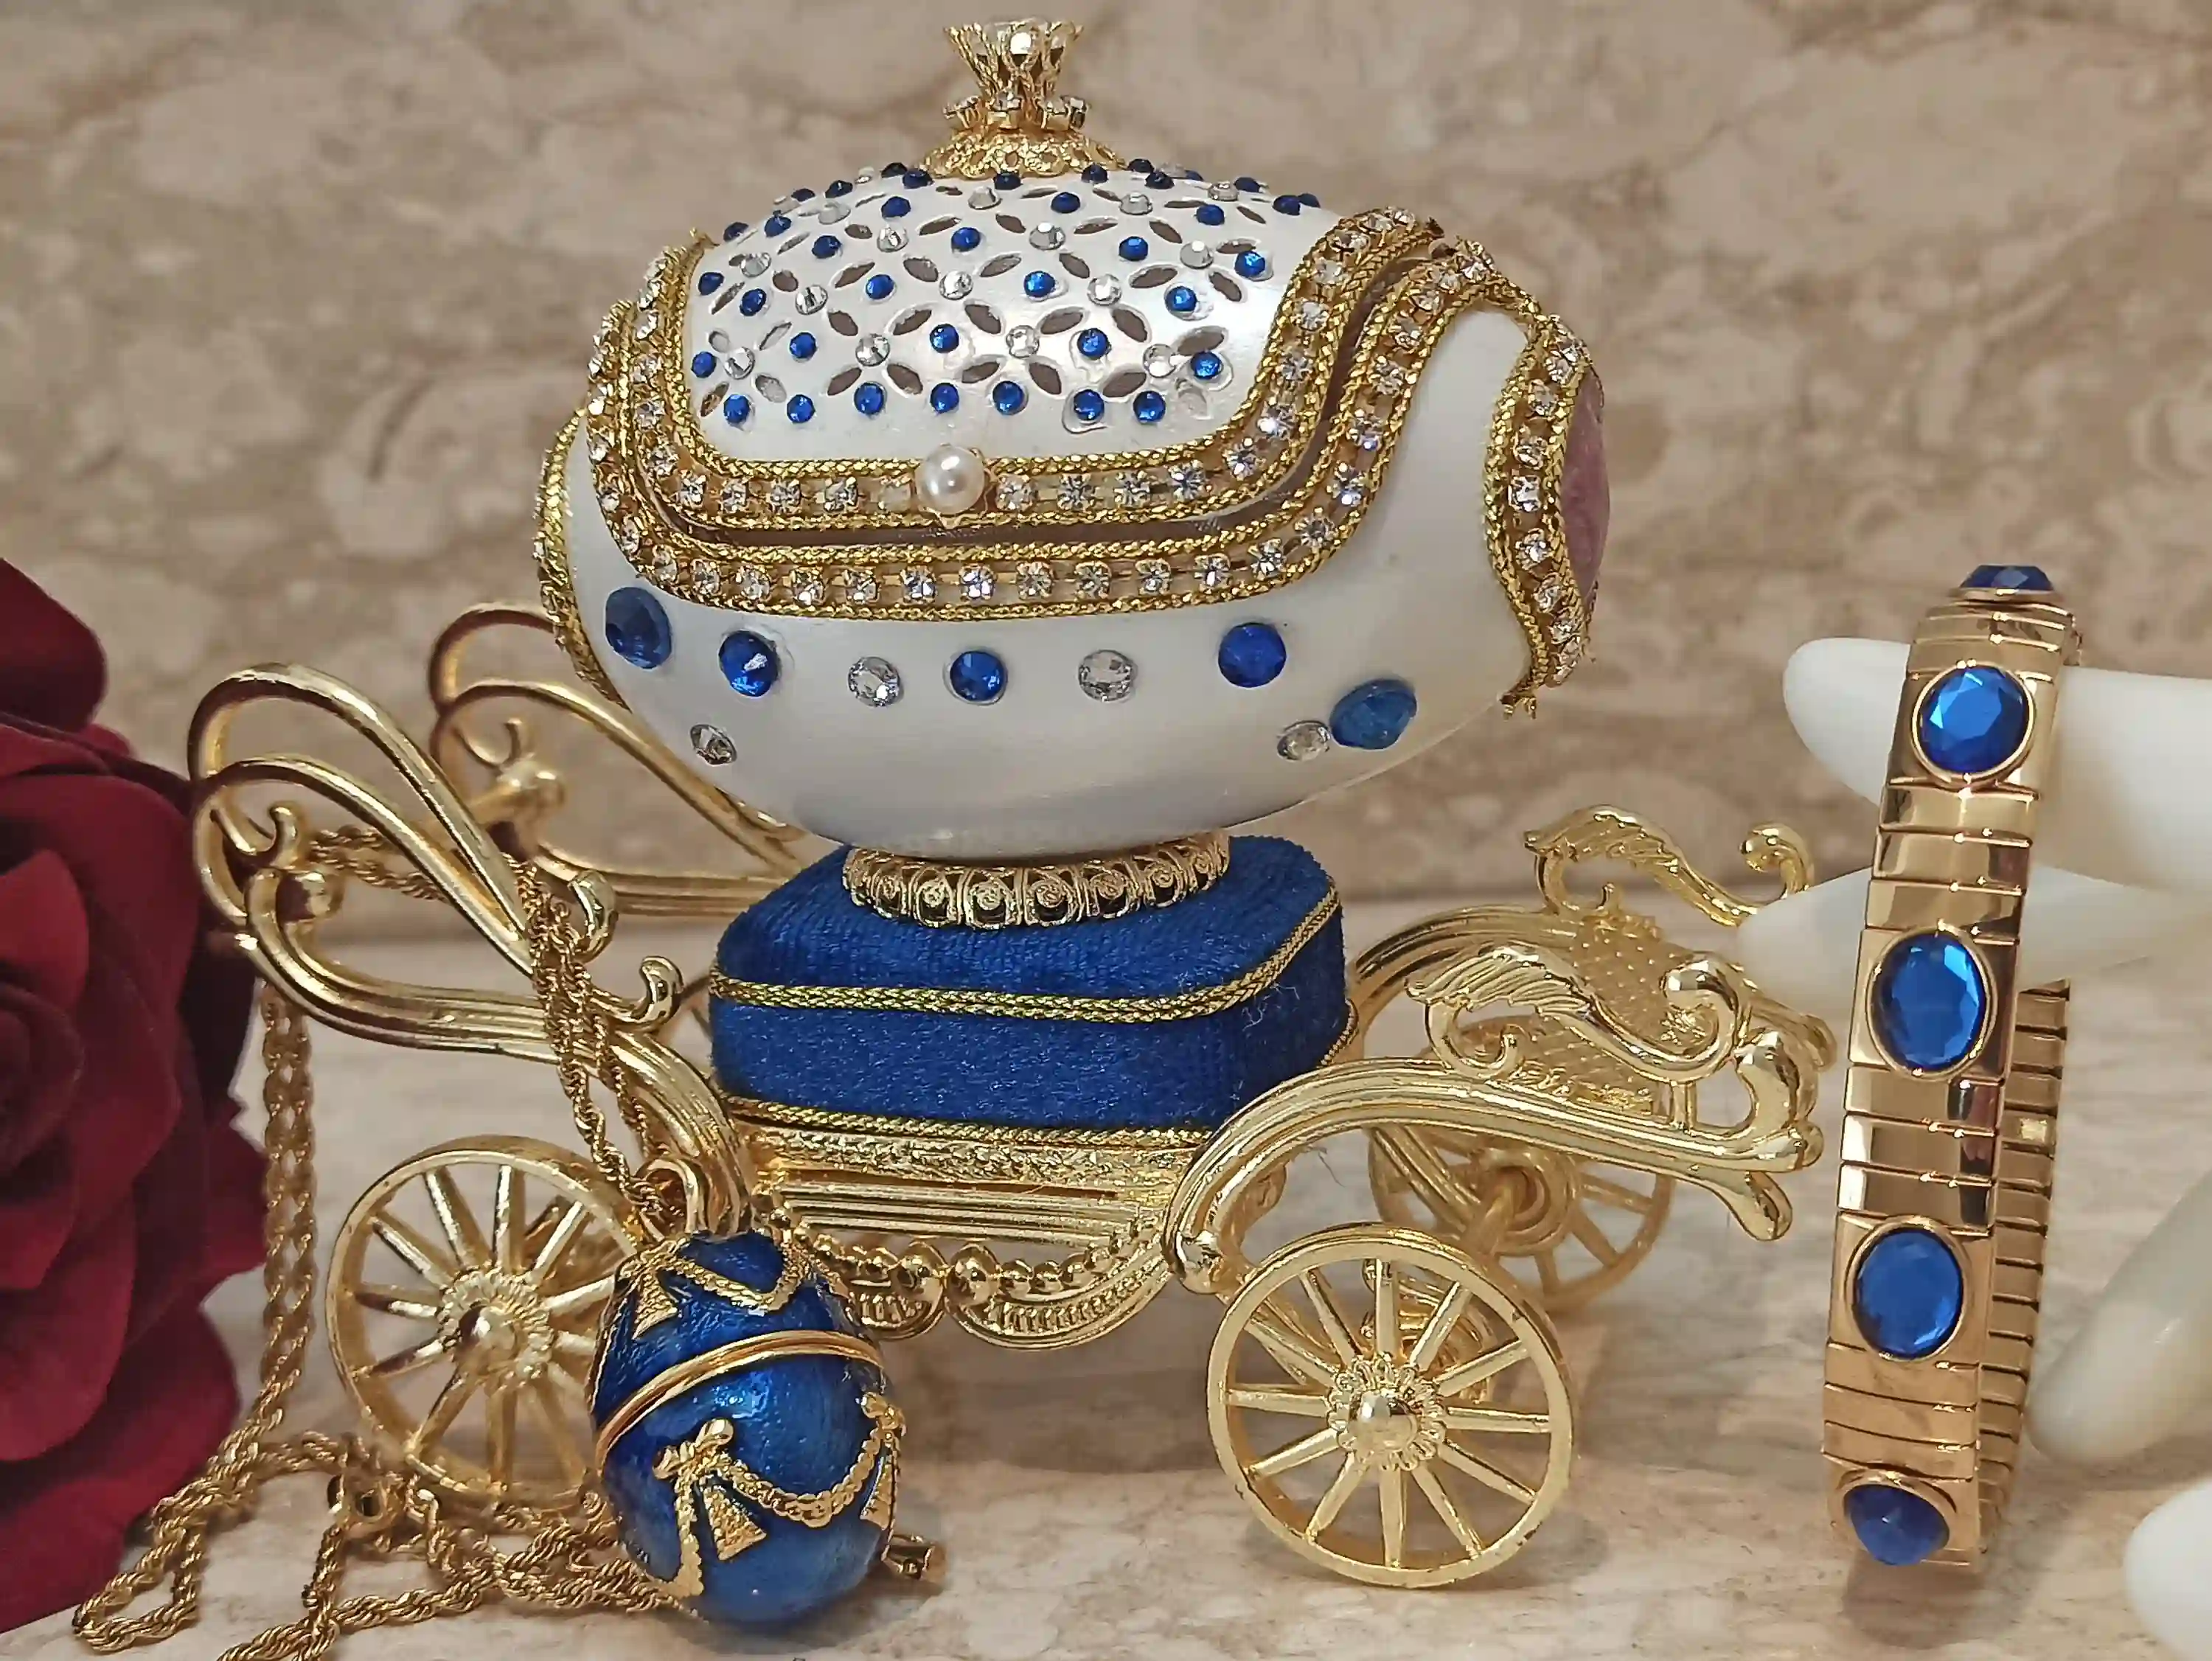 Faberge egg Carriage Sapphire Jewelry box gift for Mom Mother wife NATURAL Egg Swarovski Sapphire Diamonds 24k Gold Bracelet & Necklace 